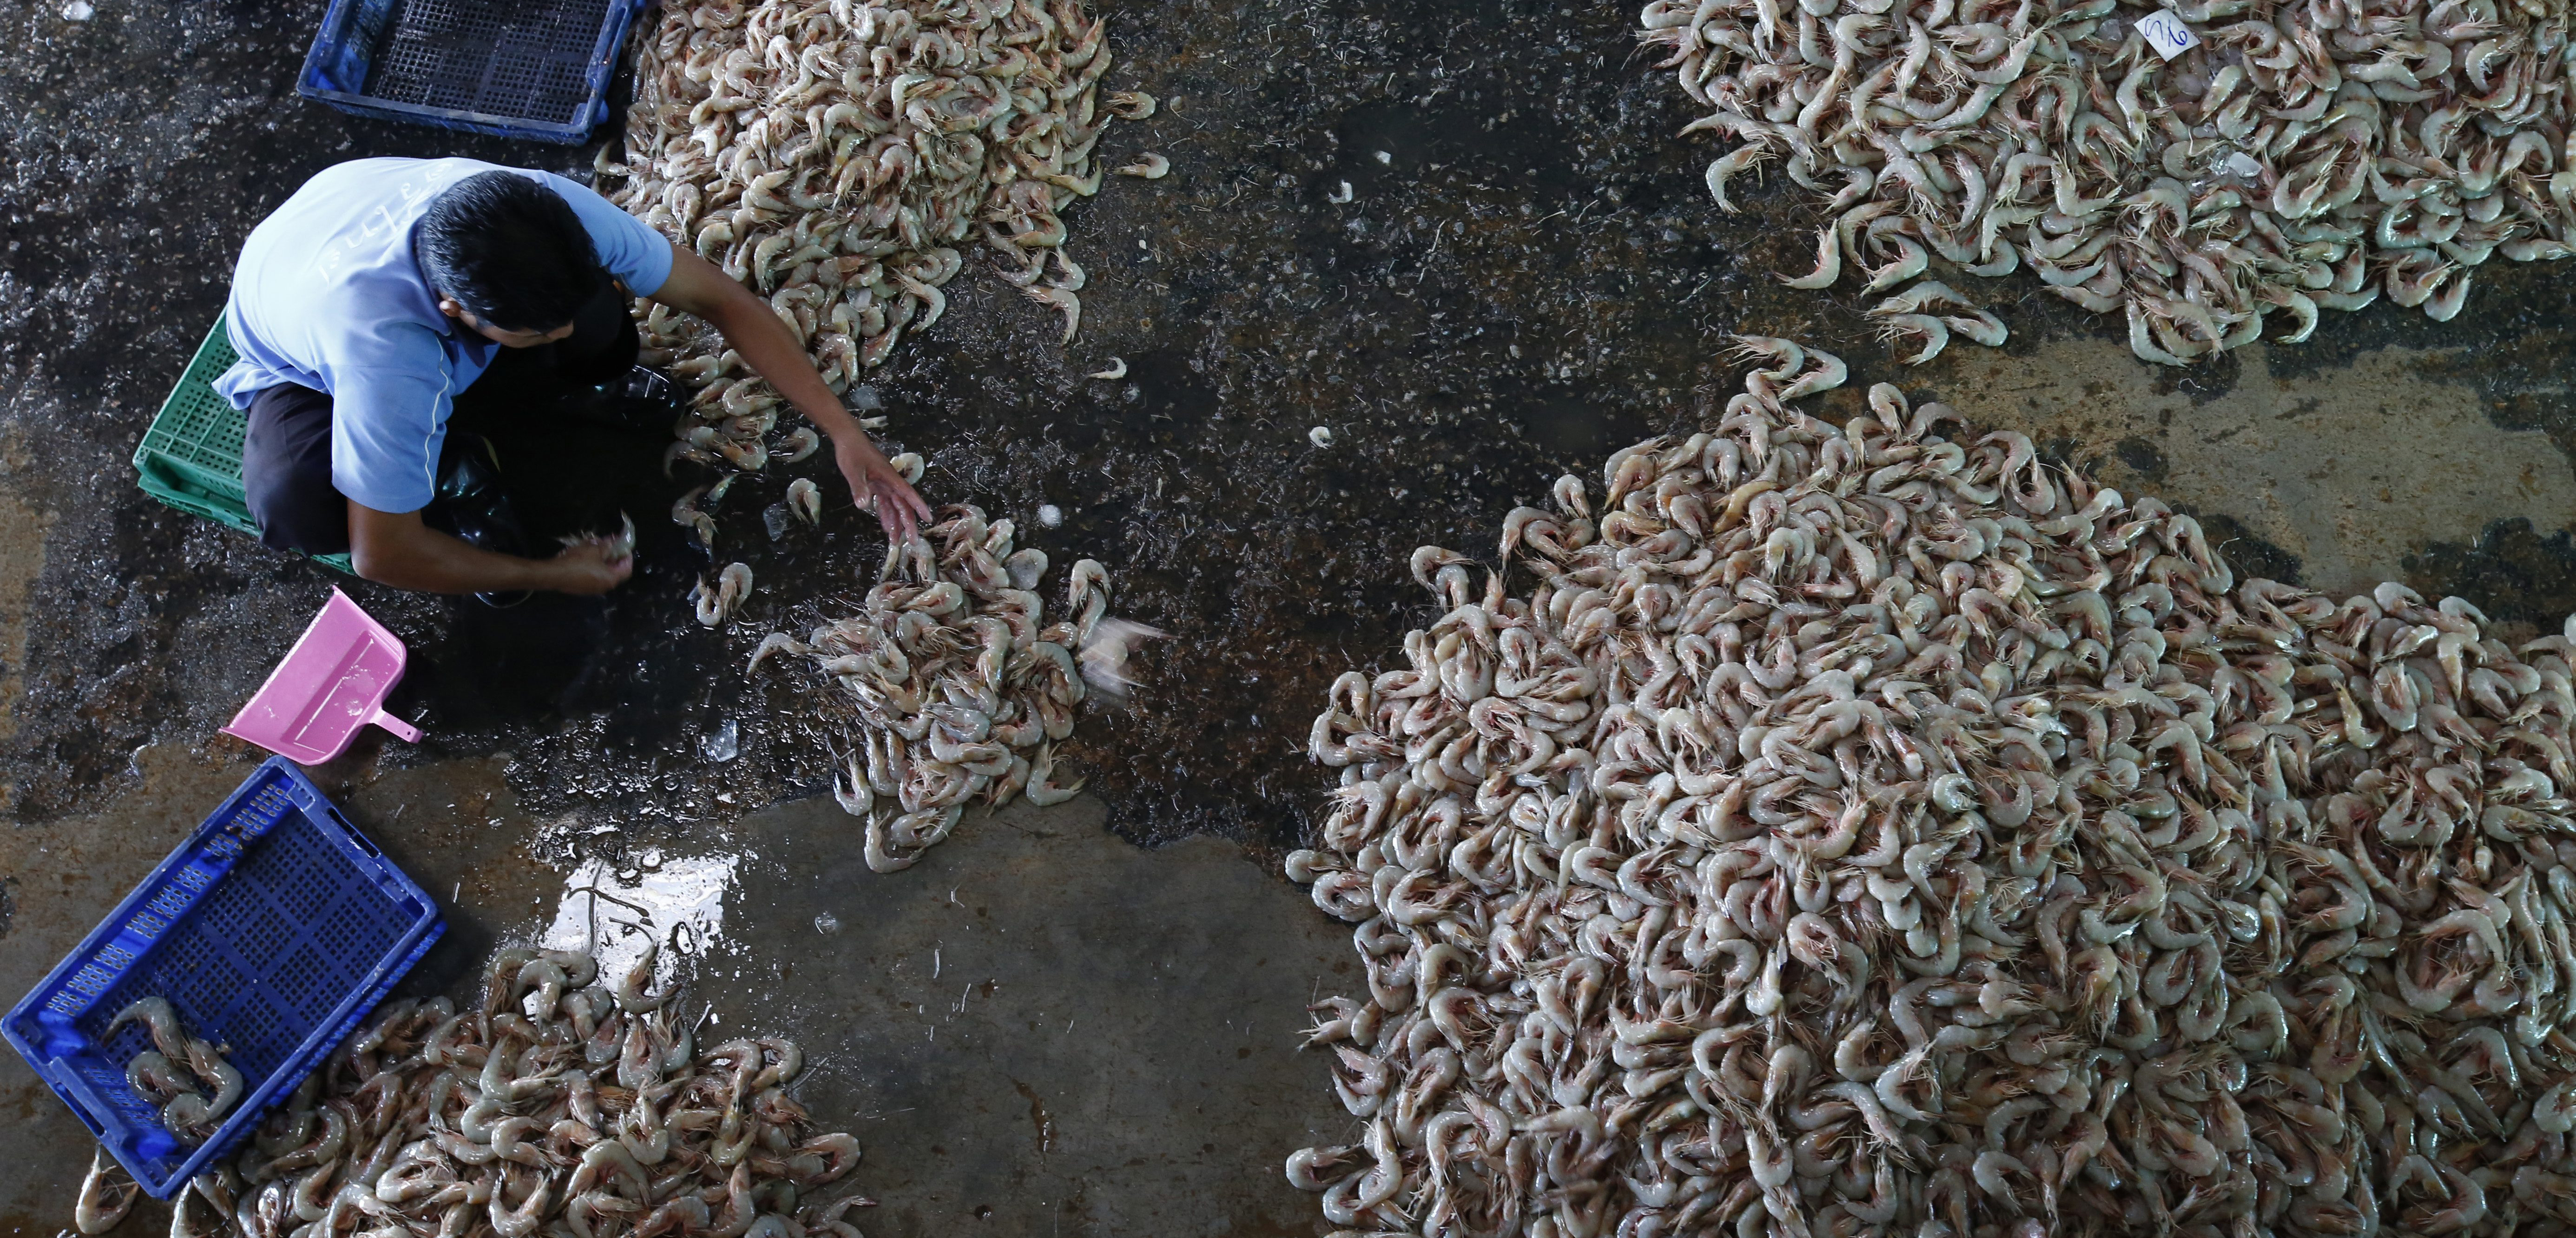 A new investigative report shows that slave workers are used in the Thai shrimp industry, and that the shrimp is being sold in the US, Europe, and Asia. Photo by Barbara Walton/epa/Corbis